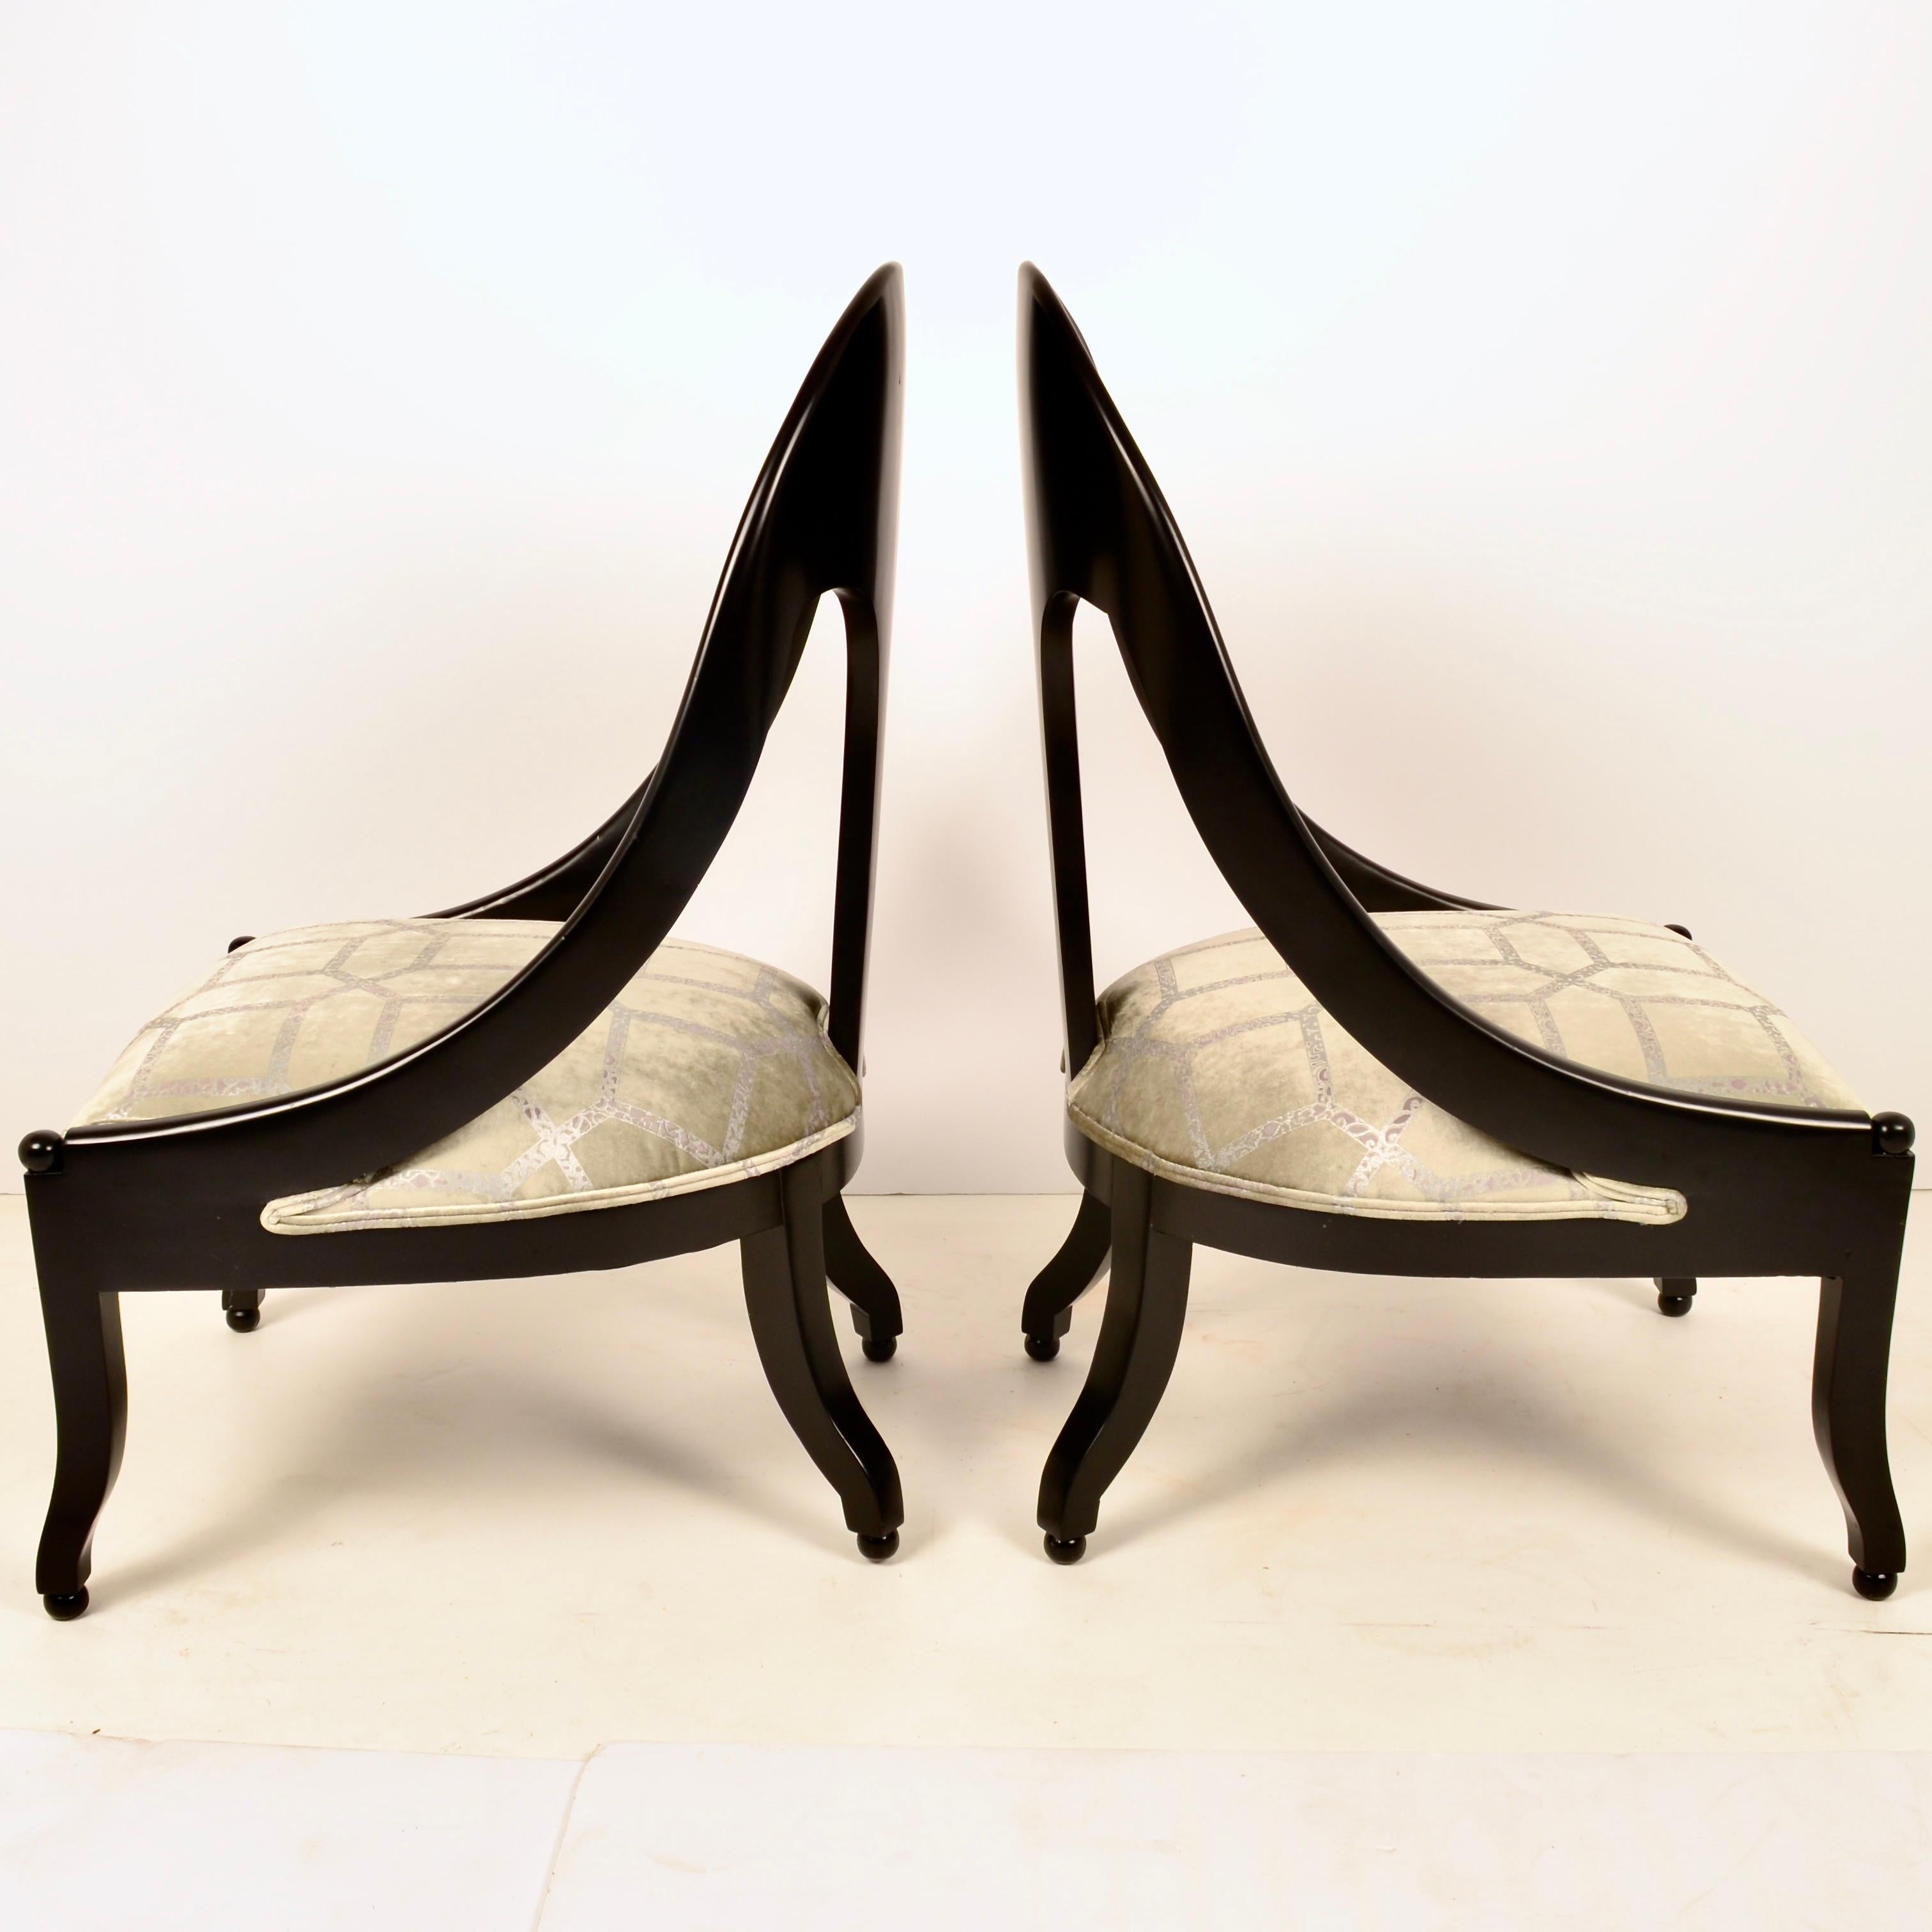 American Pair of Spoon Back Slipper Chairs in Black Satin Lacquer